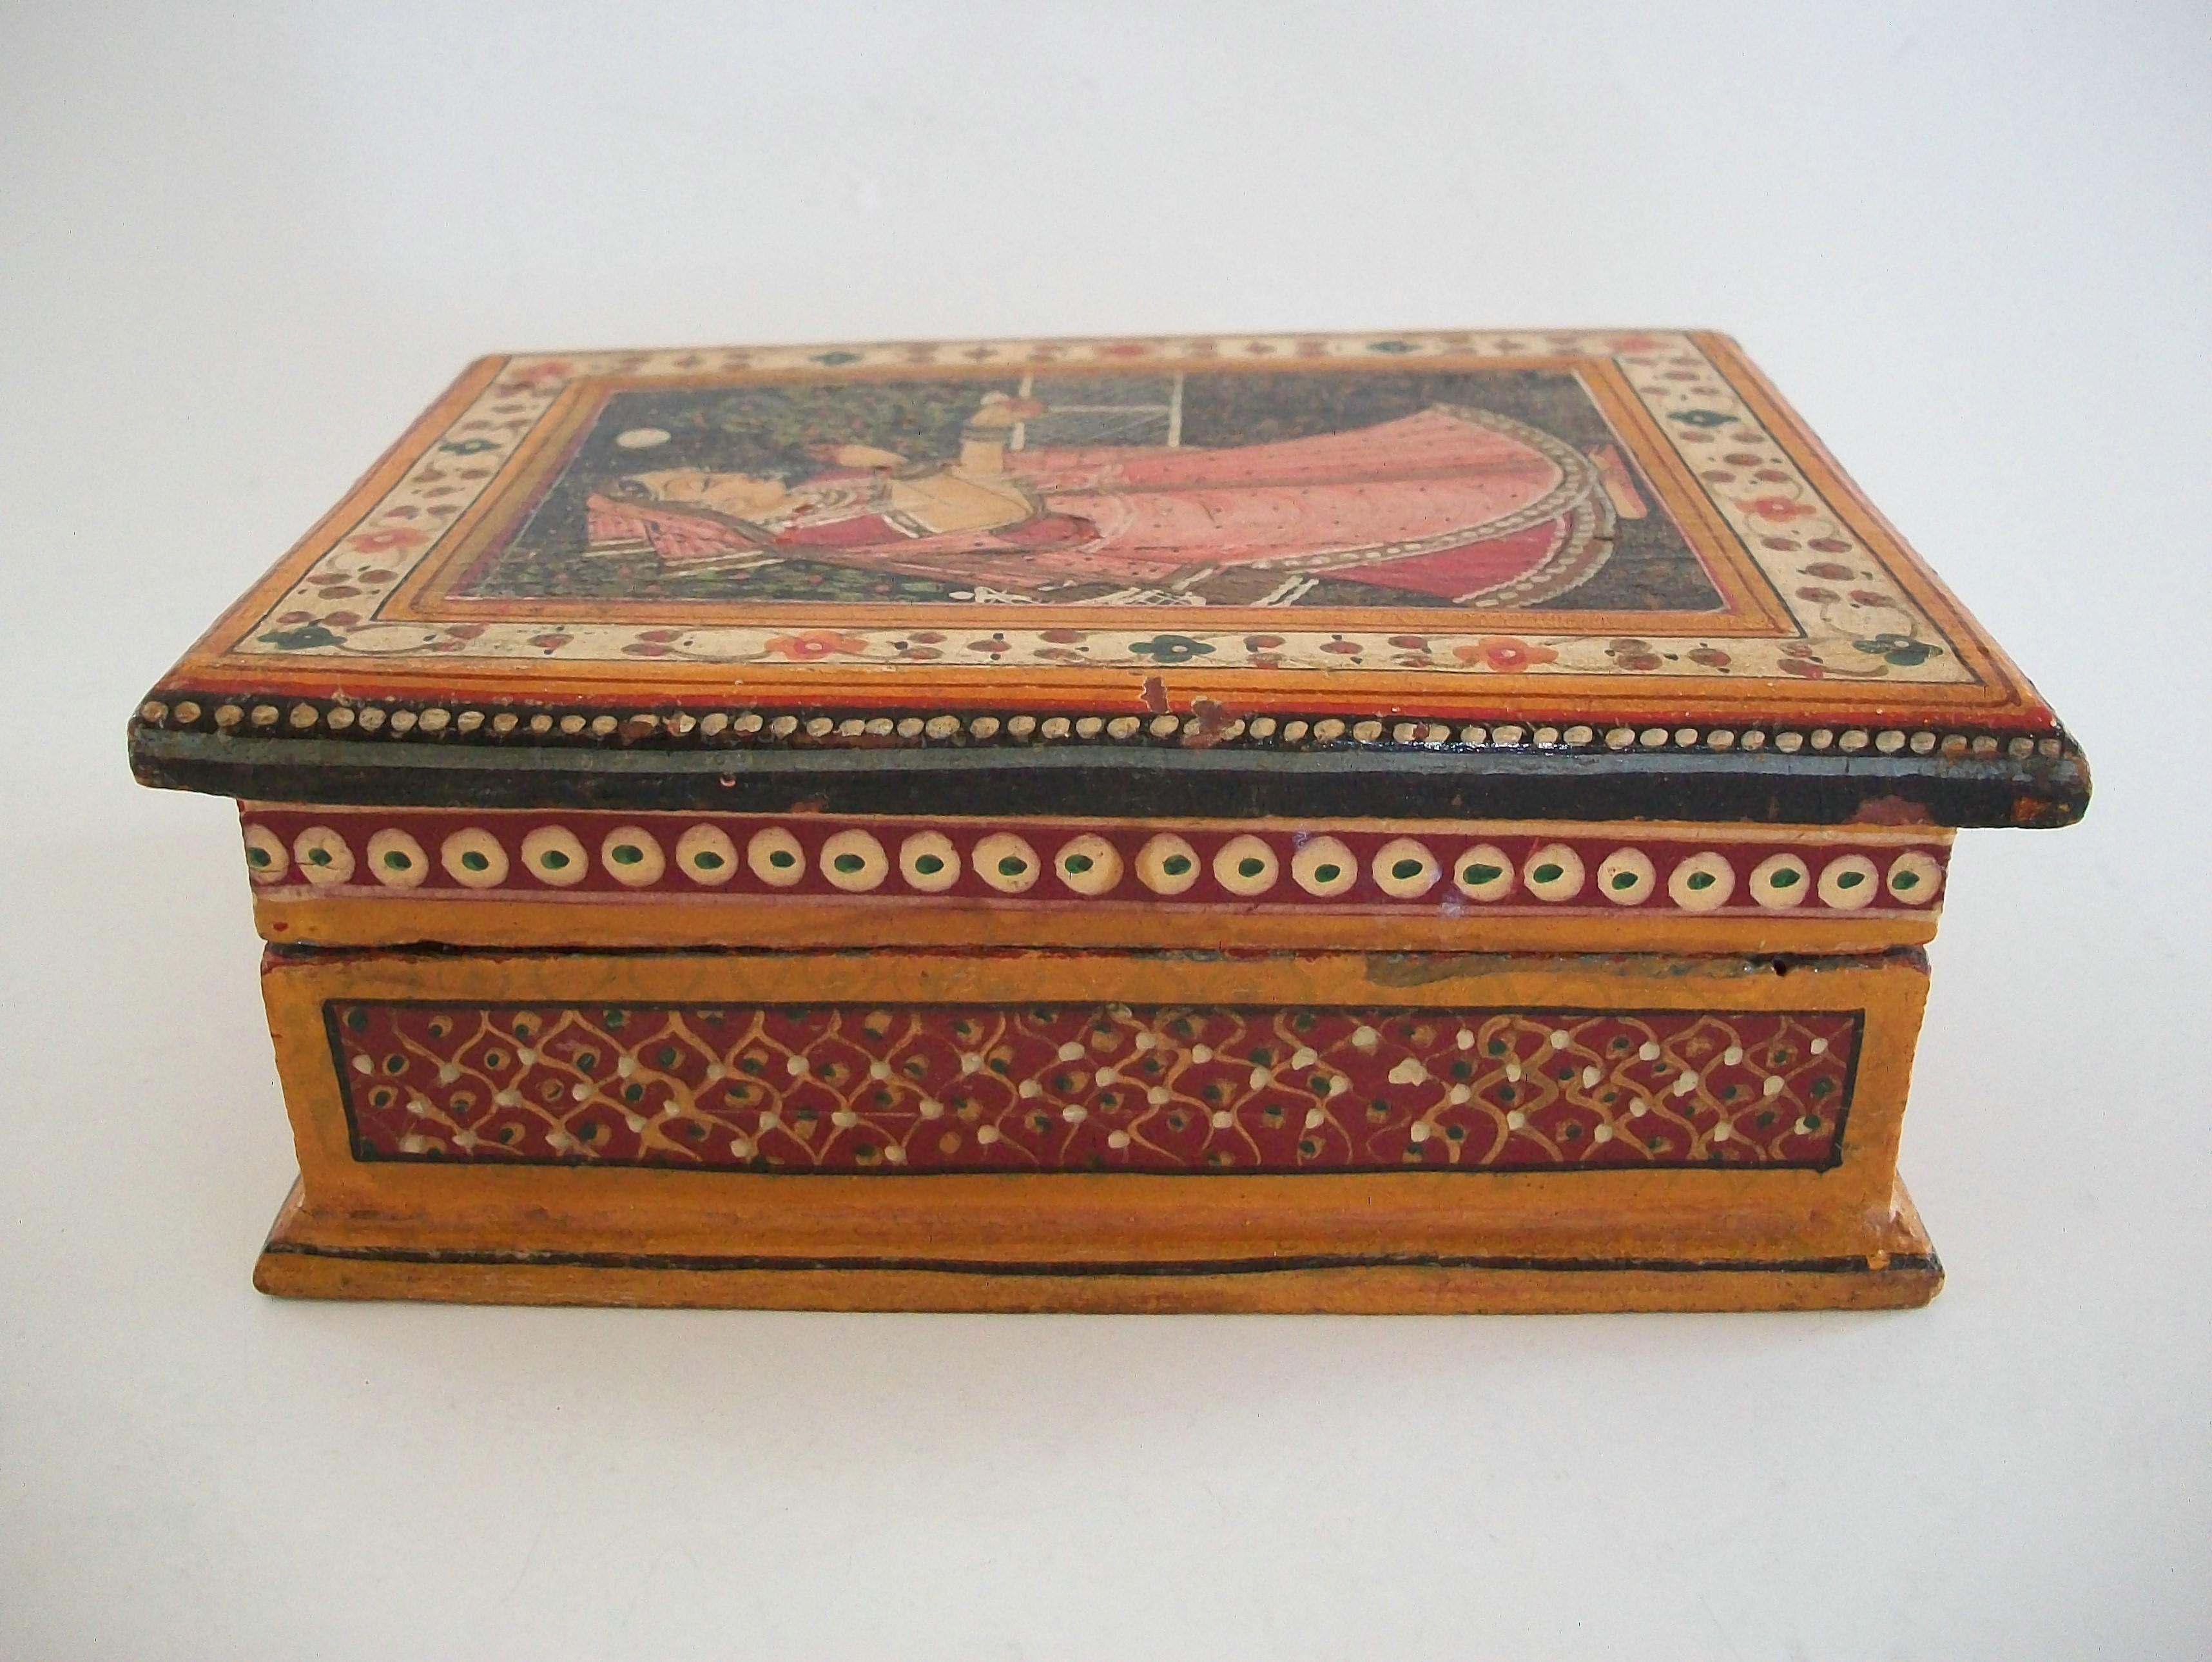 Vintage South Asian Folk Art Hand Painted Wooden Box - India - Mid 20th Century For Sale 3